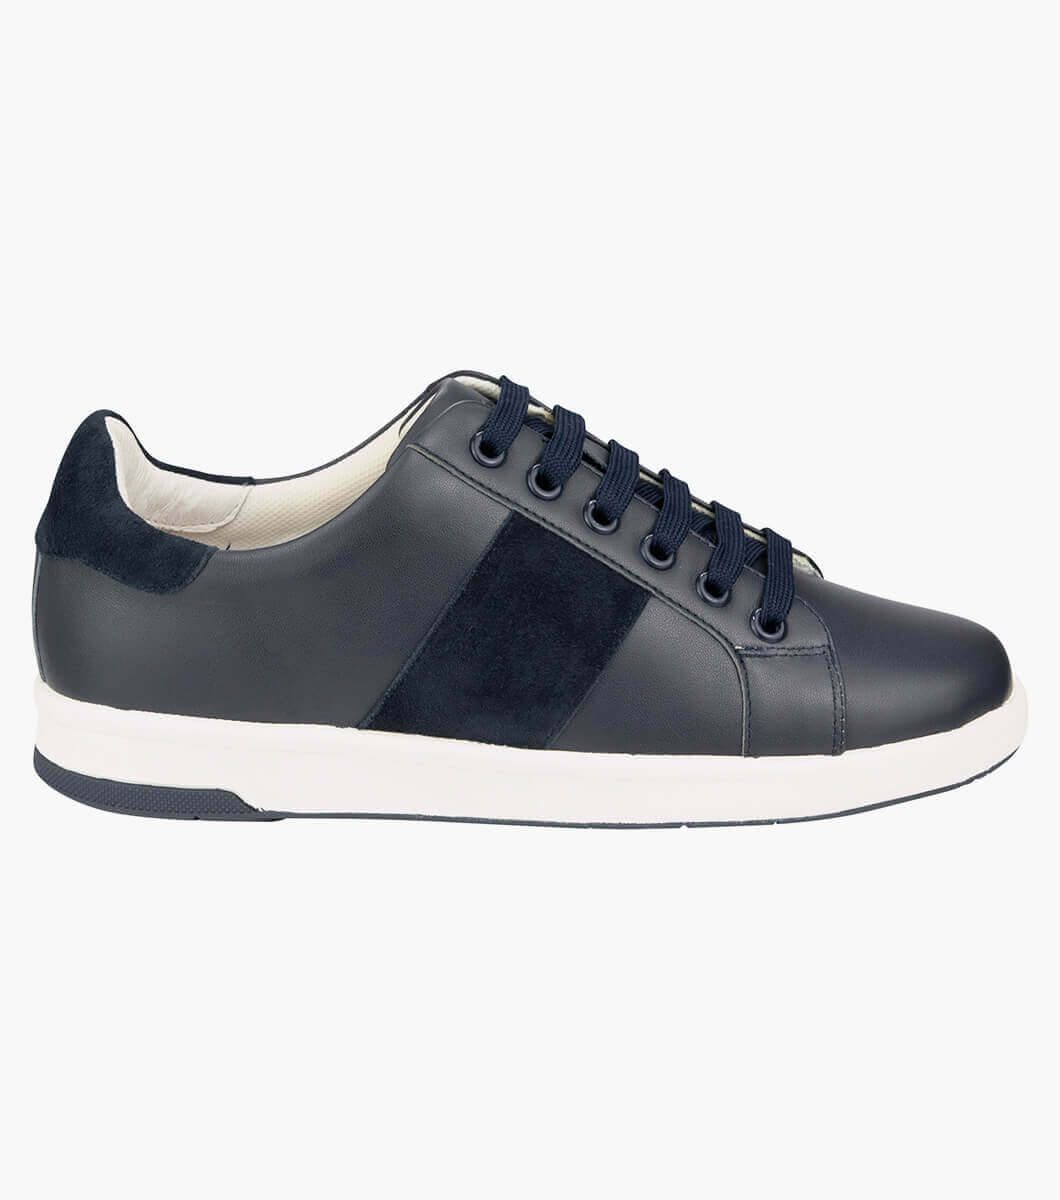 Crossover Lace To Toe Sneaker Women's Sneakers | Florsheim.com